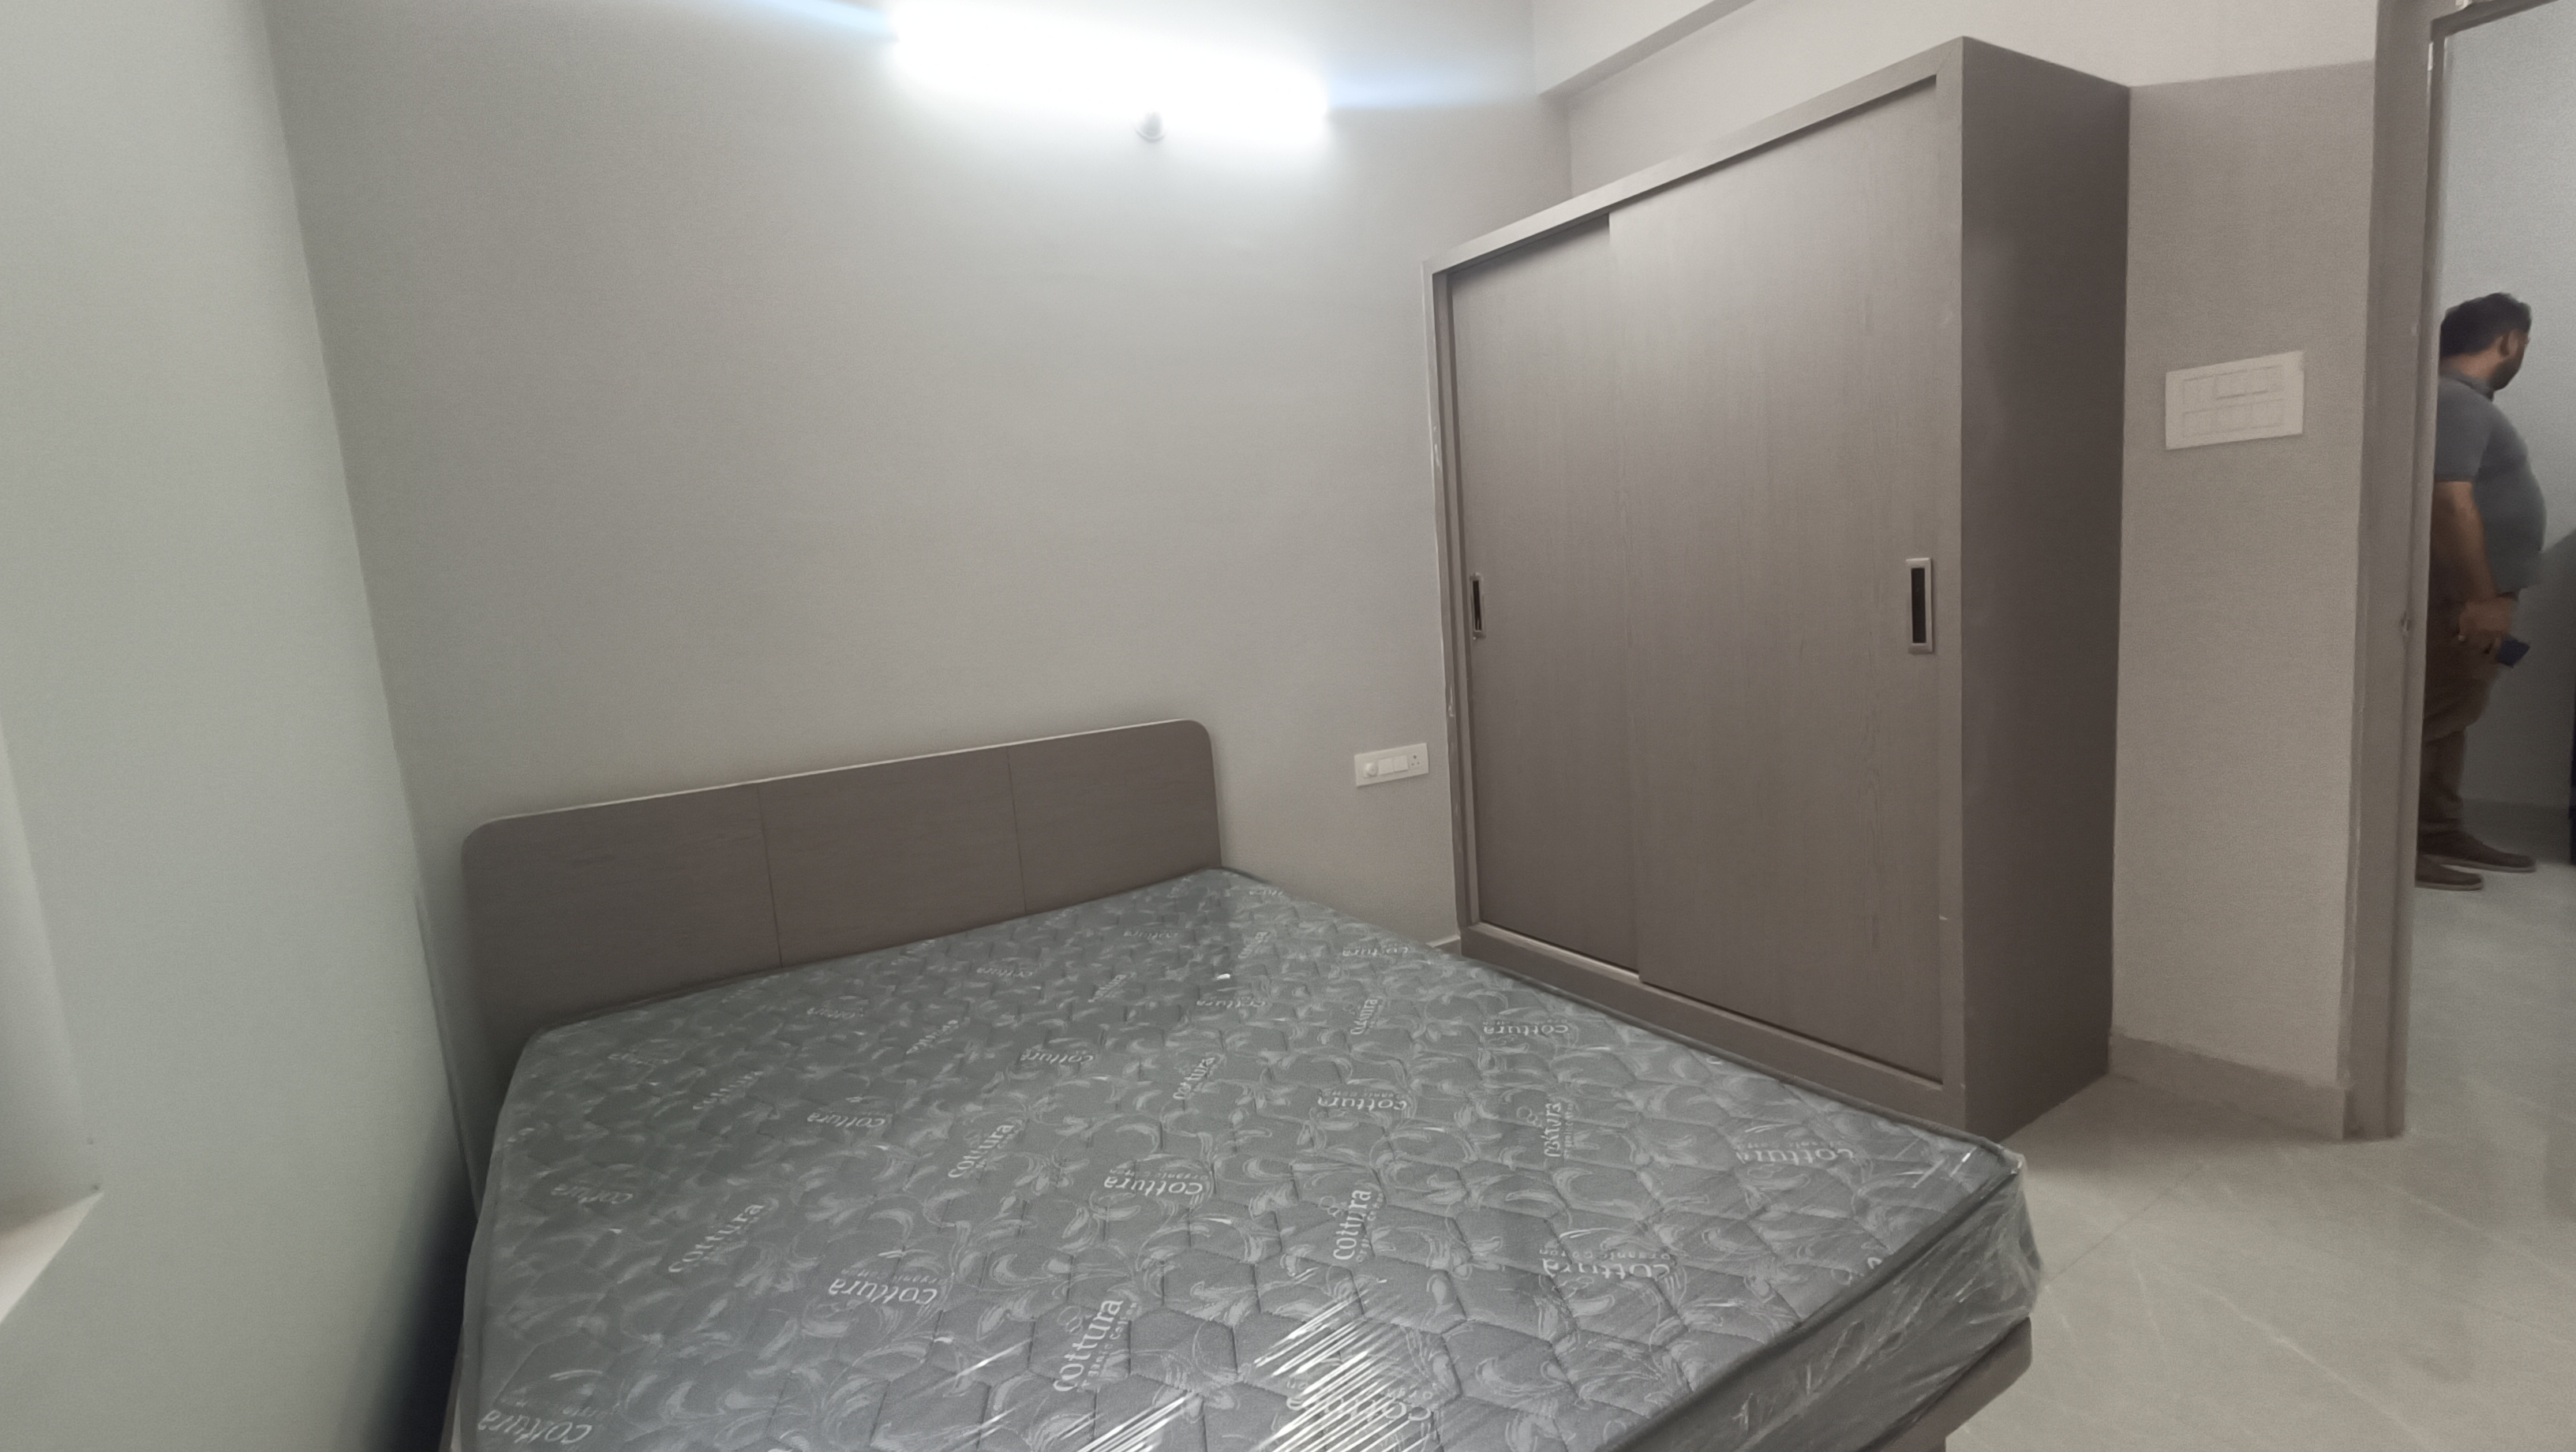 1 BHK Residential Apartment for Rent Only in Kondapur